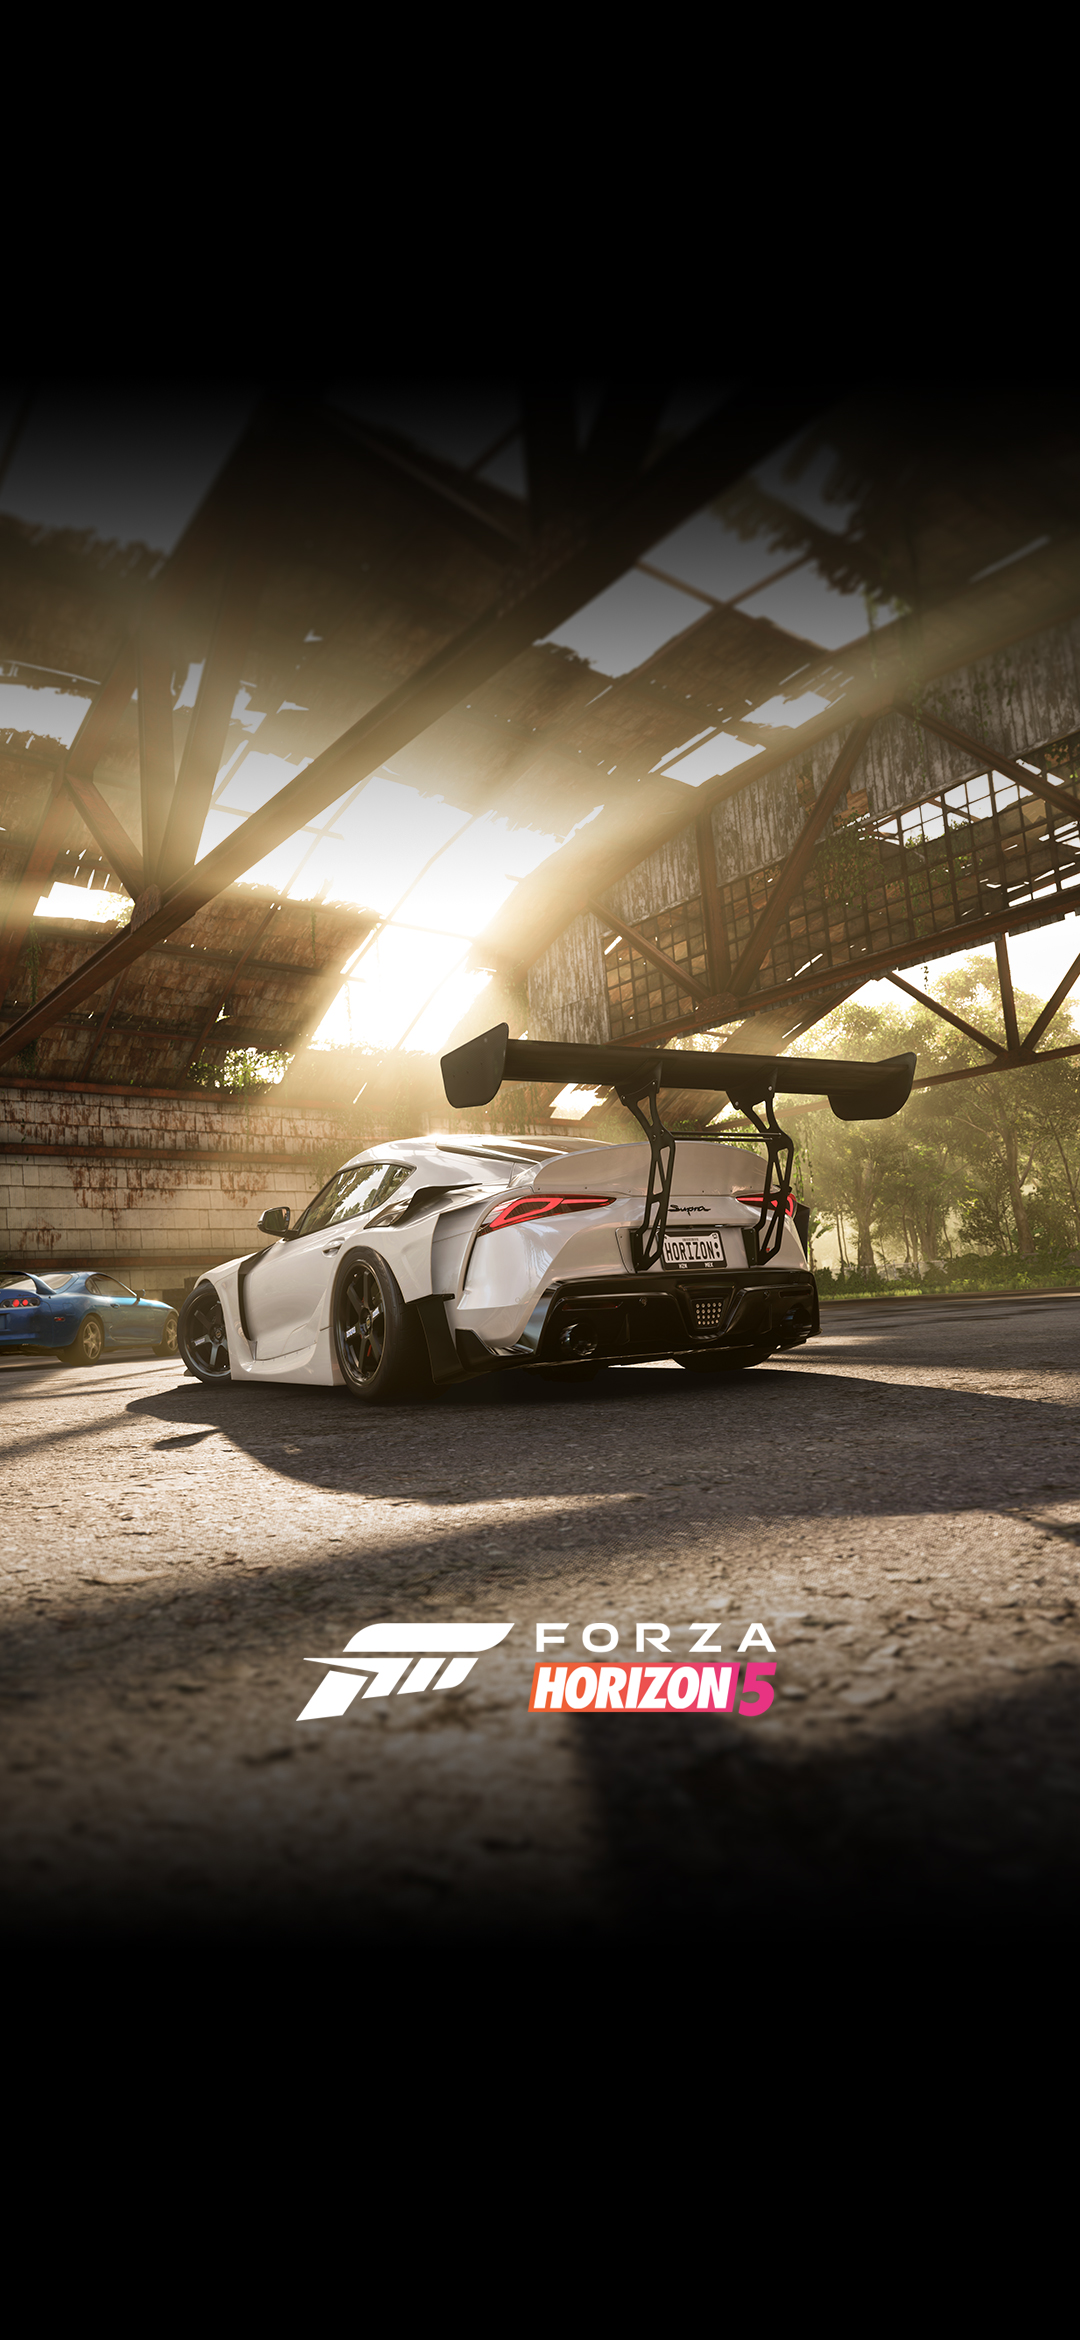 Forza horizon on are these the best wallpapers weve ever shared on a wednesday find out next week httpstcoijbzrb